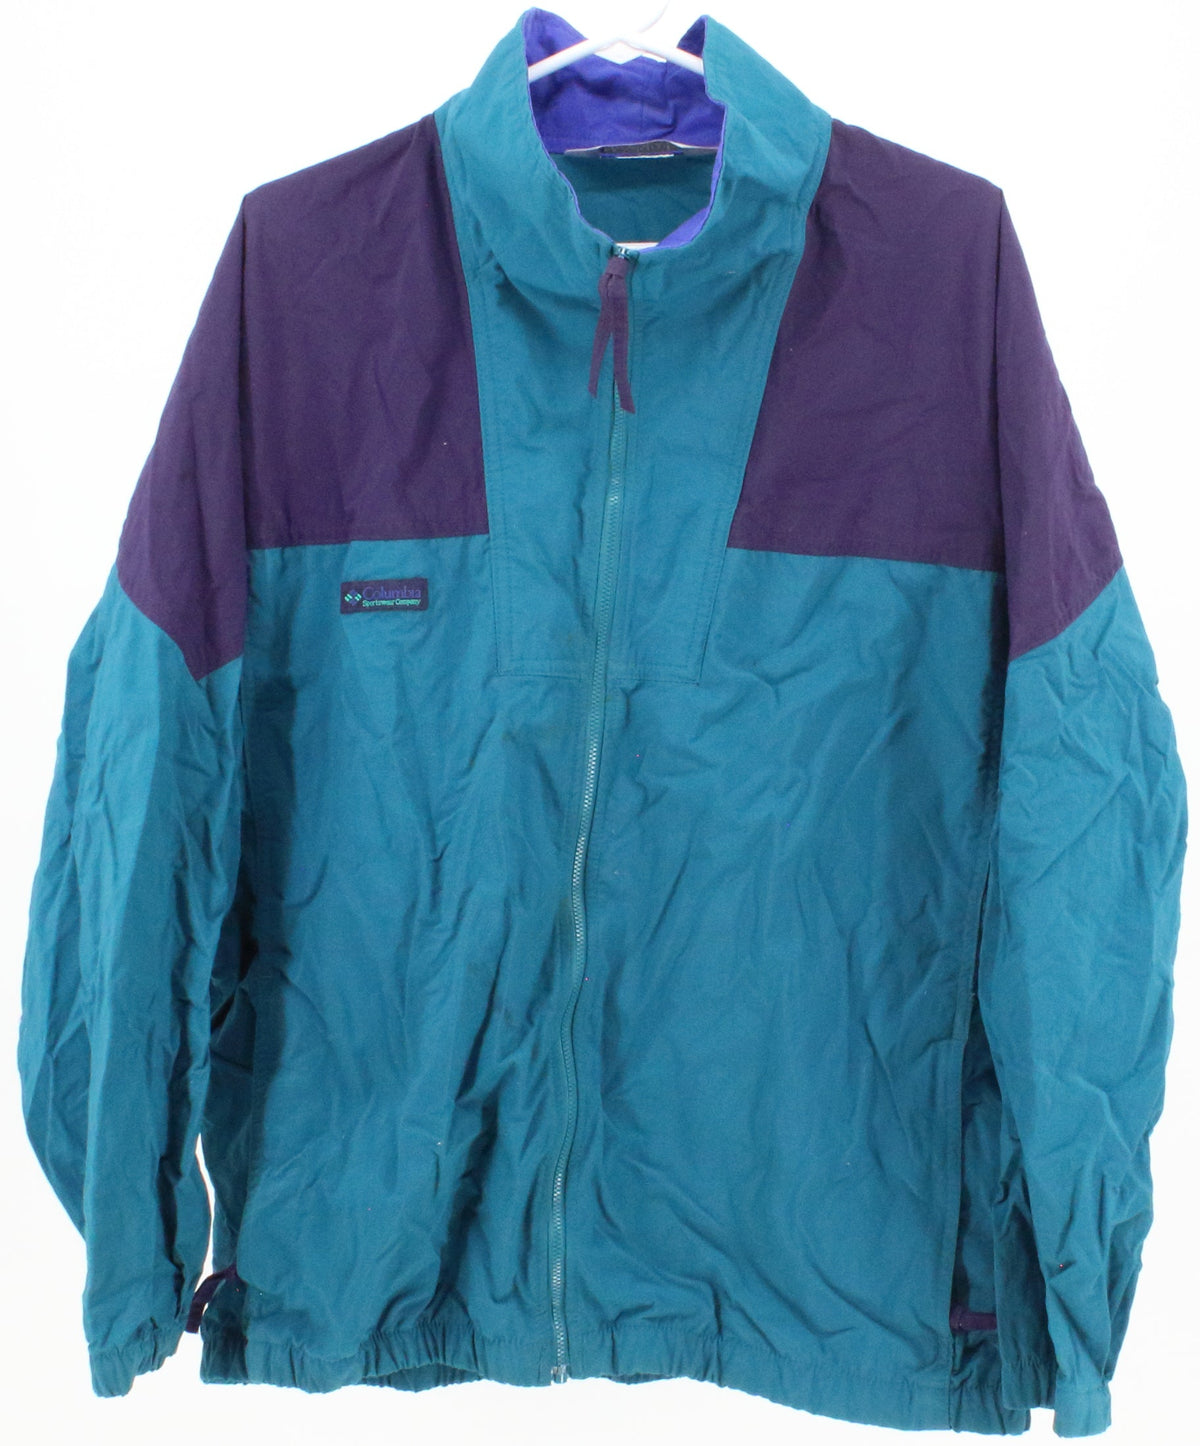 Columbia Women's Blue and Purple Bomber Jacket